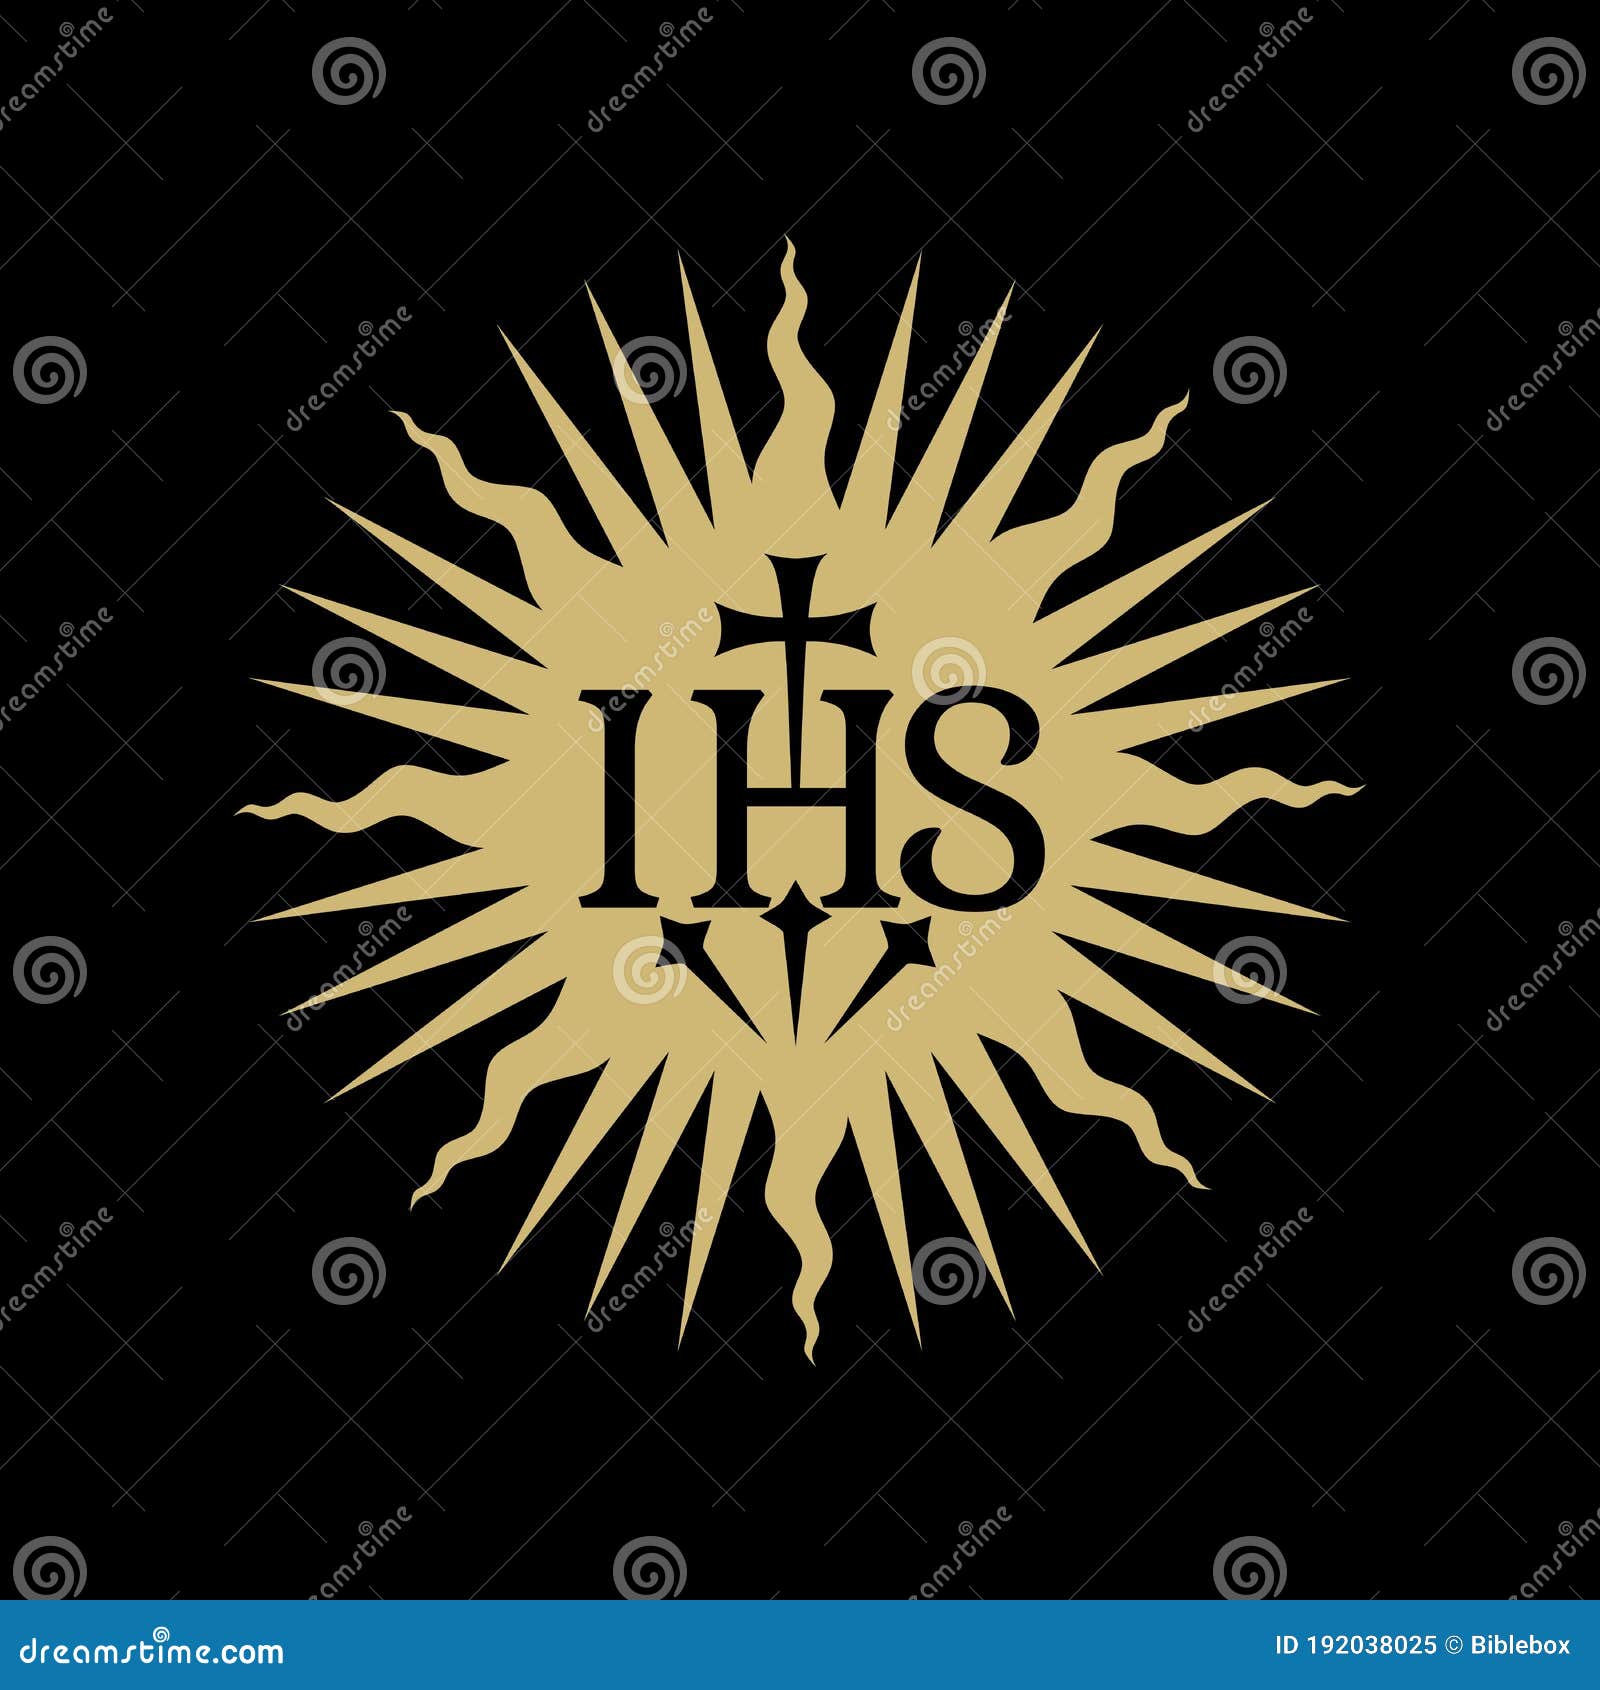 christian s.  of the jesuit order. the society of jesus is a religious order of the catholic church headquartere